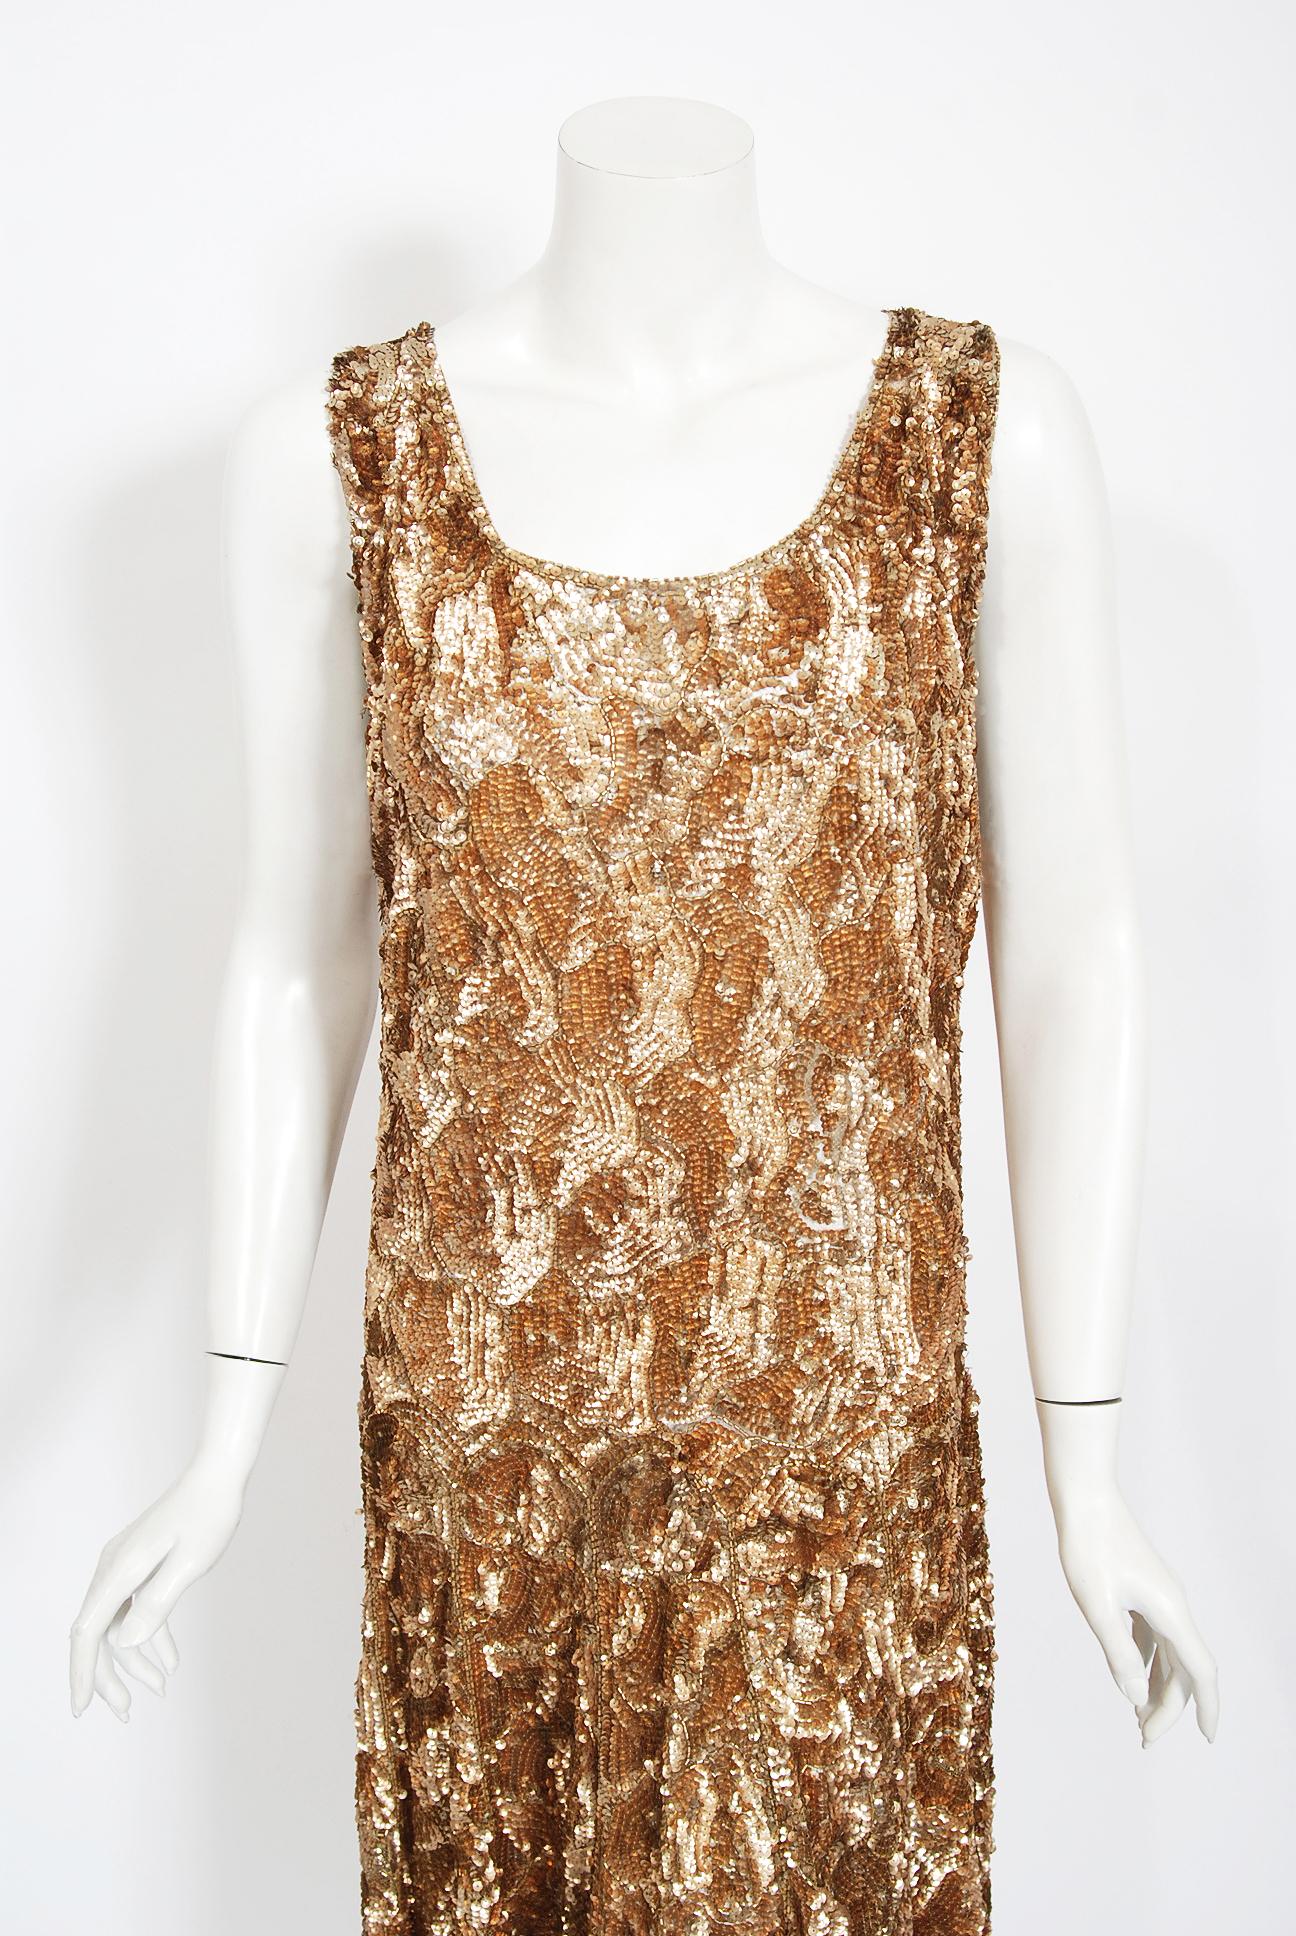 Breathtaking 1920's French sparkling cotton-net flapper dance dress. The metallic golden color palette mixed with the unique fish scales deco pattern touches a deep chord in our collective aesthetic consciousness. As fashion lovers, we never tire